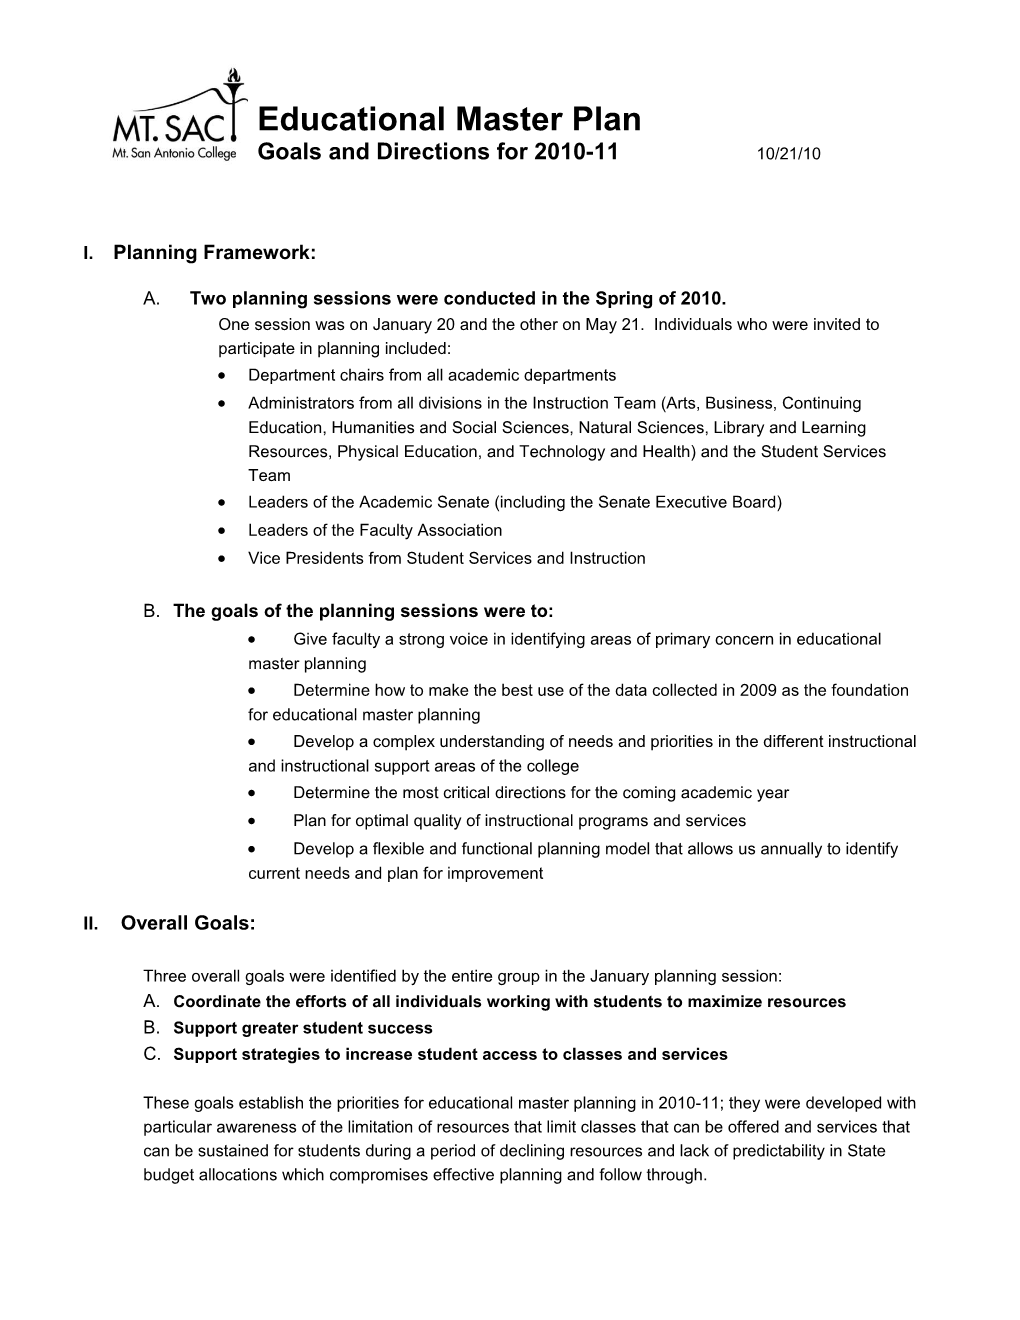 Educational Master Plan Goals and Directions for 2010-11